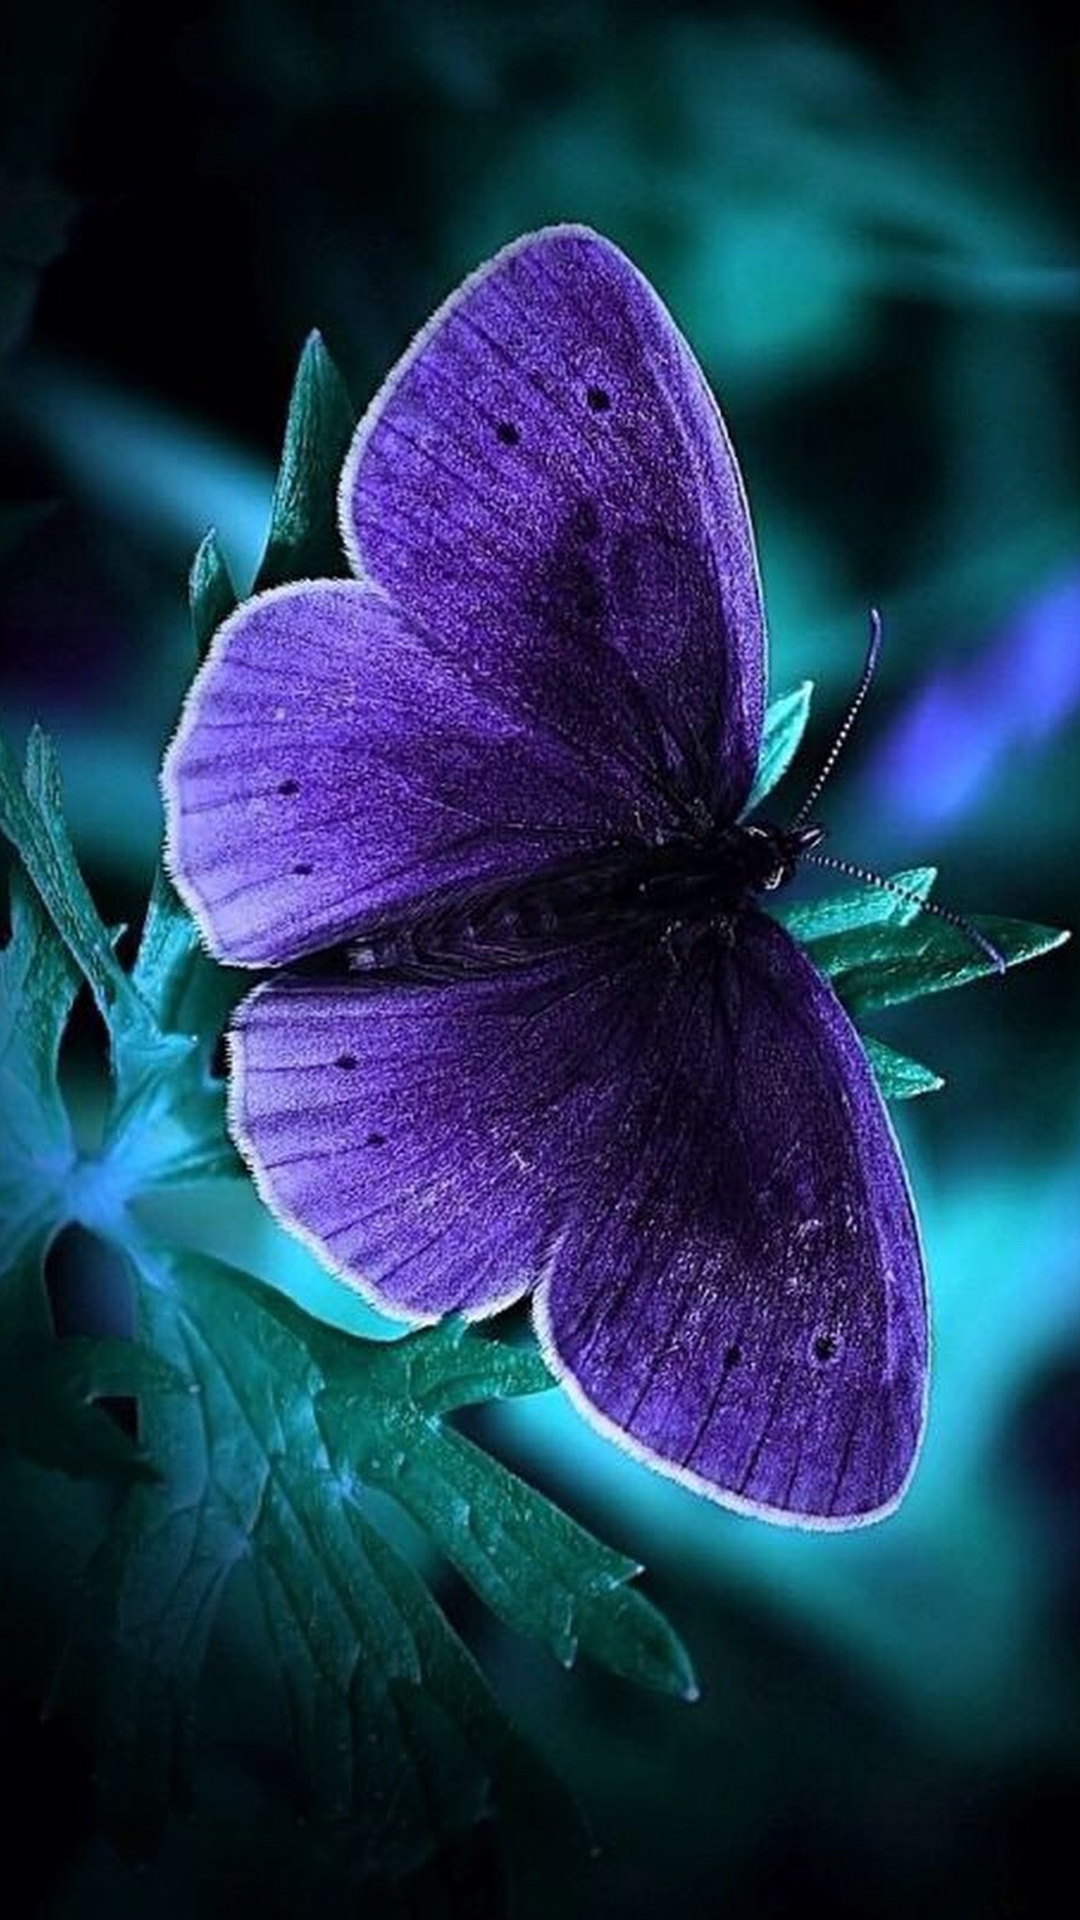 samsung j7 prime stock wallpaper,butterfly,insect,moths and butterflies,violet,purple